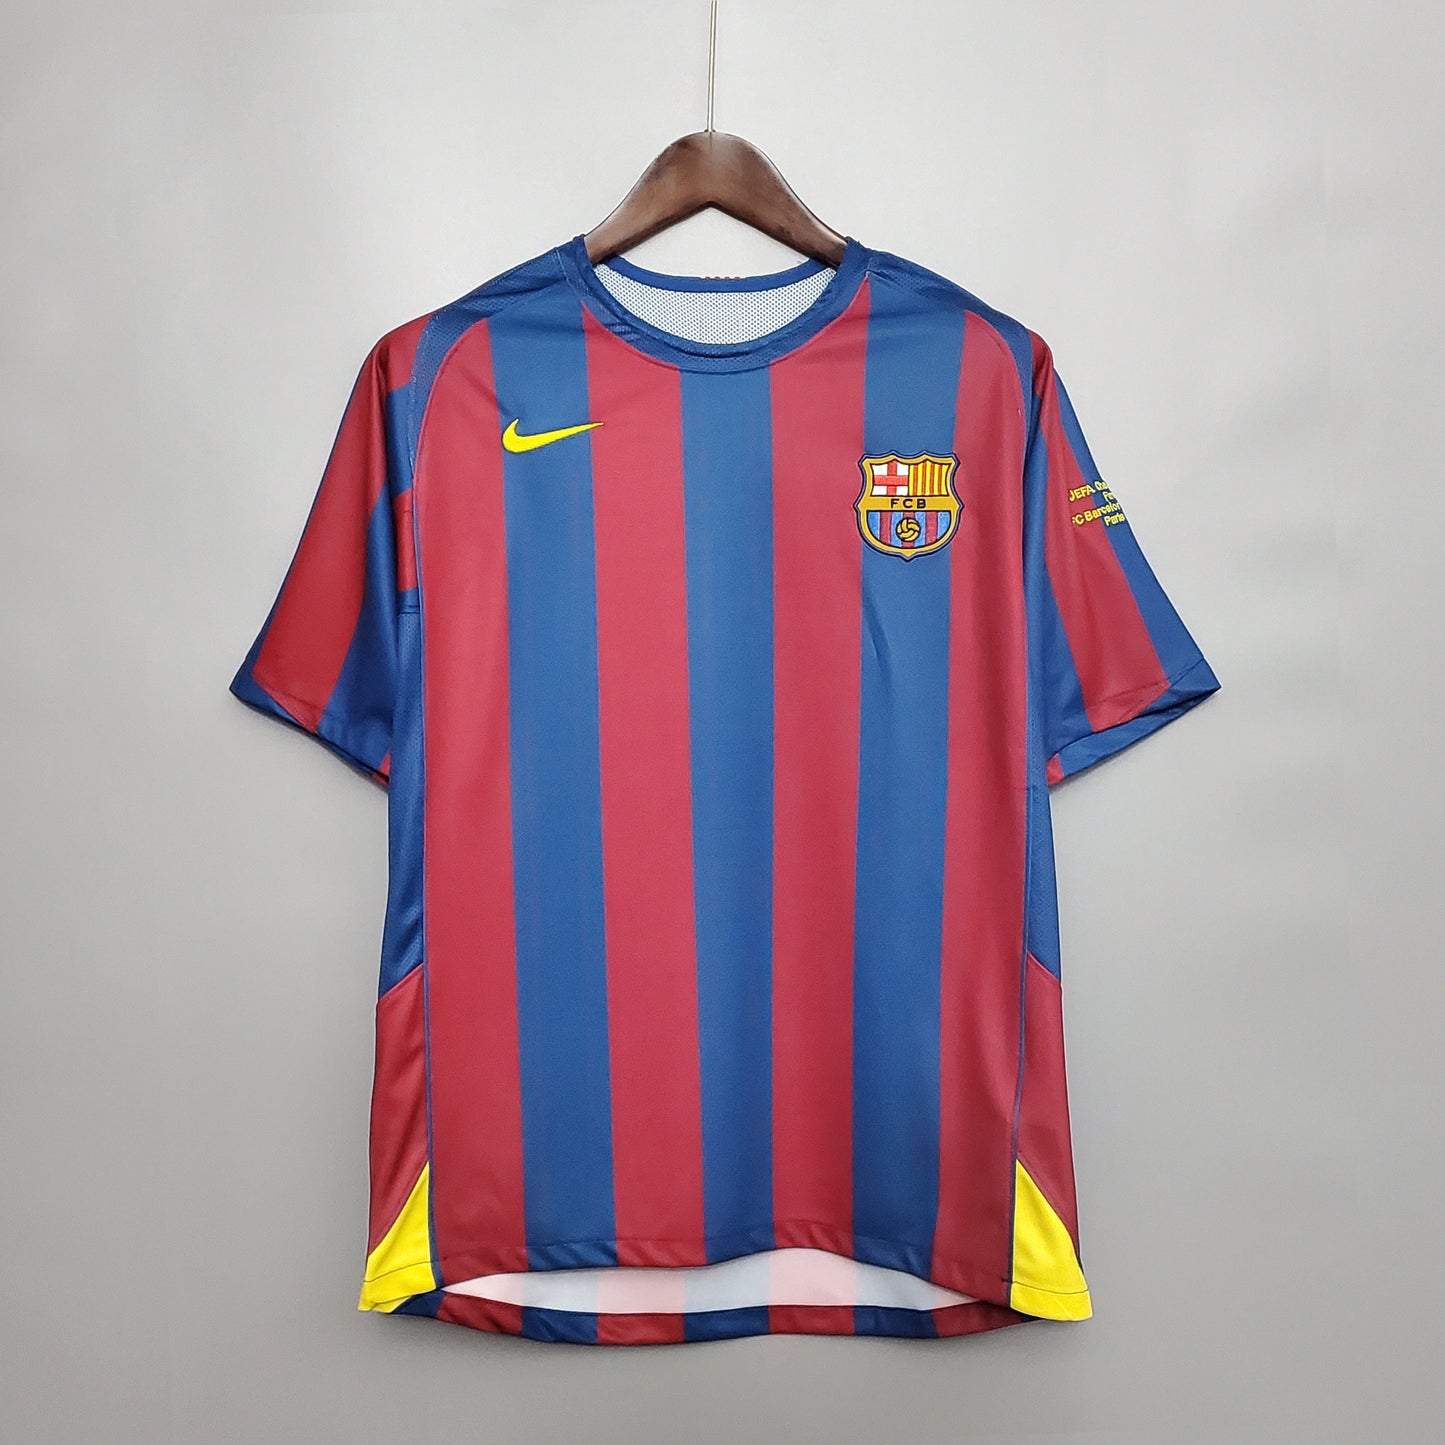 Lionel Messi FC Barcelona #30 2005/06 UEFA Champions League Final Authentic Nike Iconic Classic Retro Jersey - Blue & Red